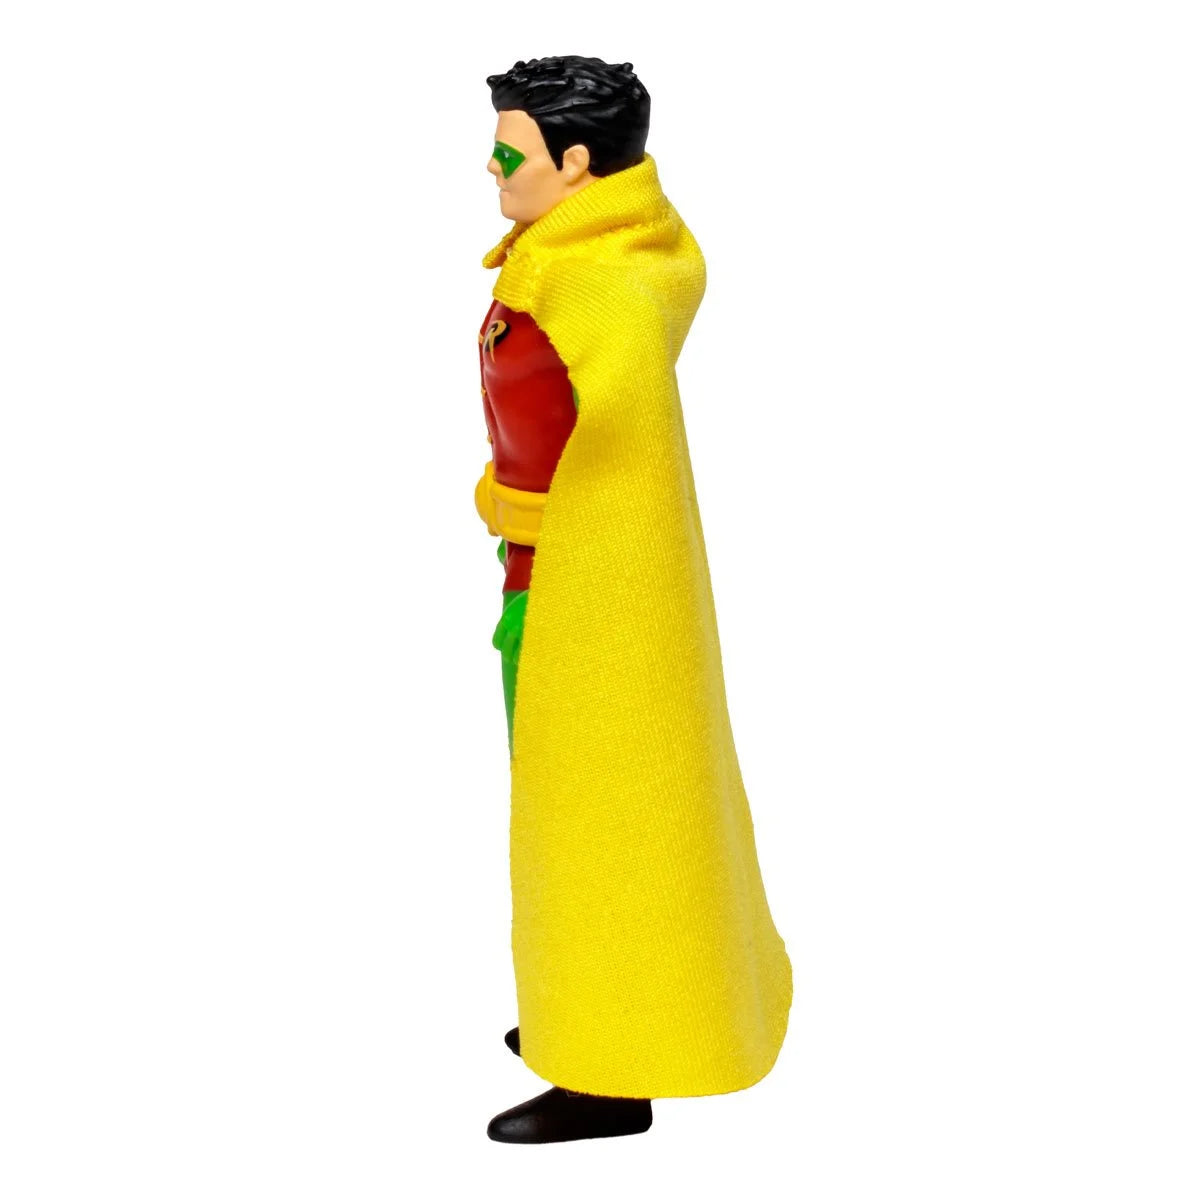 DC Super Powers Wave 4 Robin Tim Drake 4-Inch Scale Action Figure left side pose - Heretoserveyou